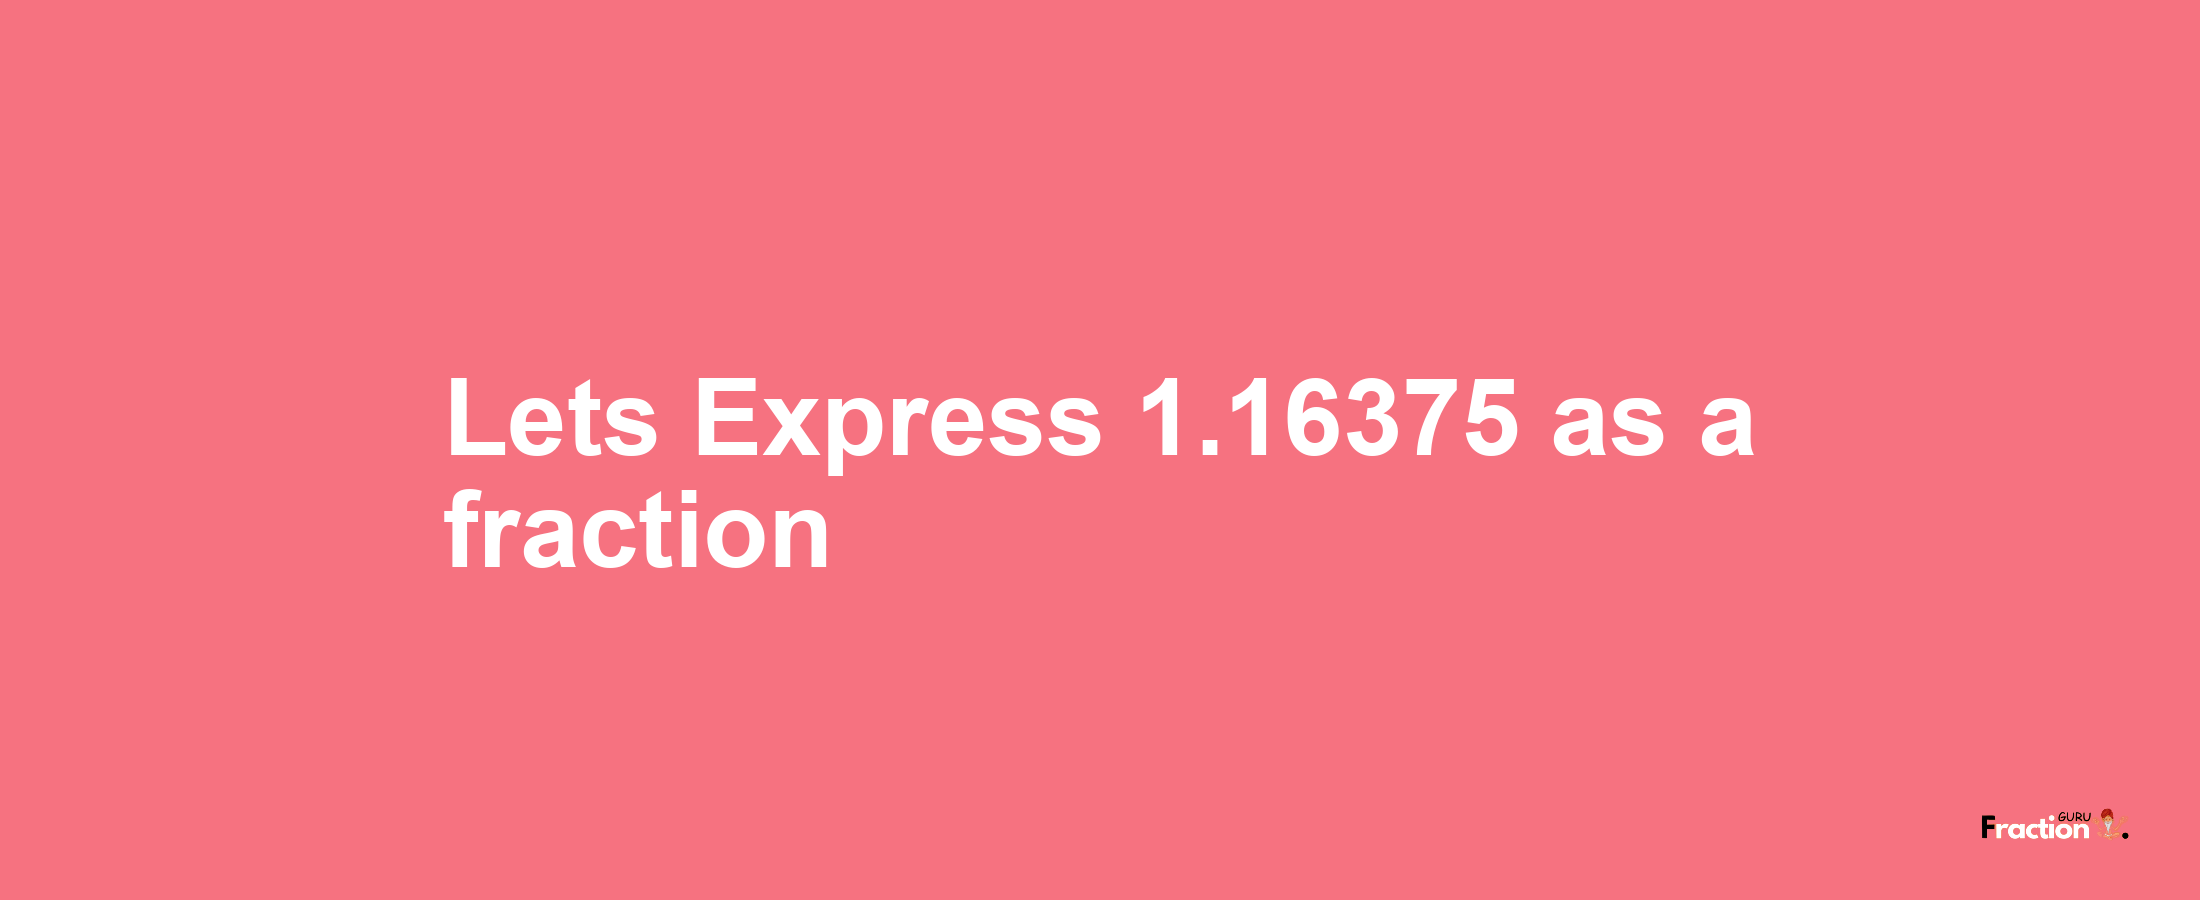 Lets Express 1.16375 as afraction